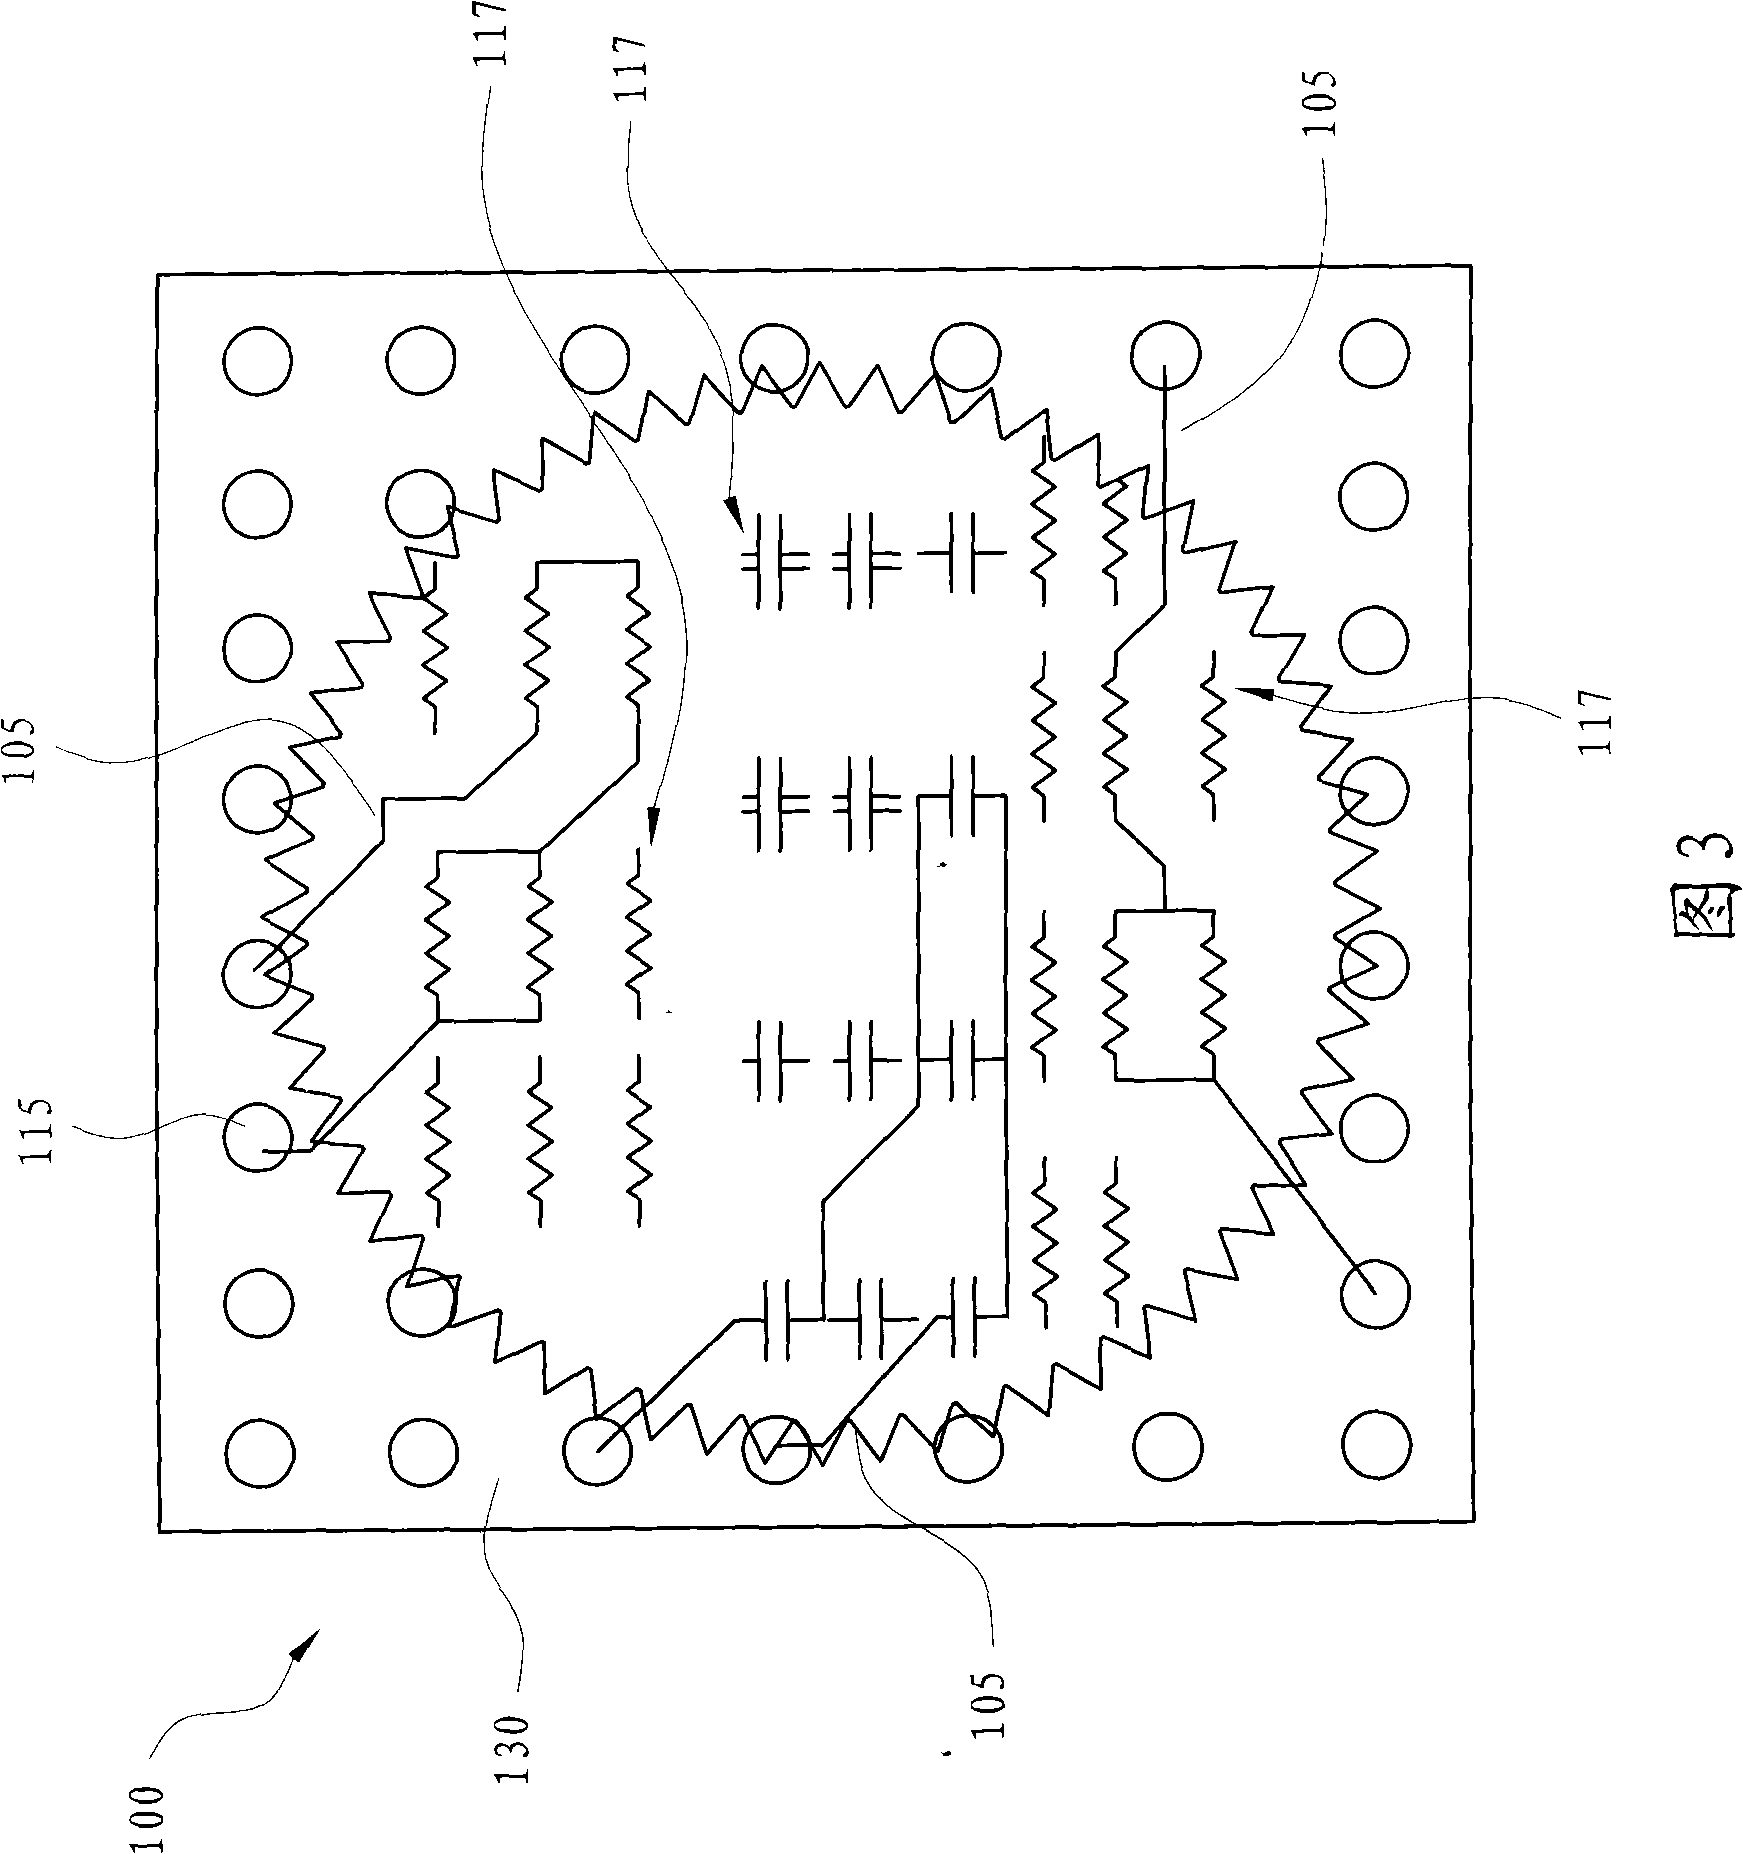 Semiconductor interposer and its application in electronic package